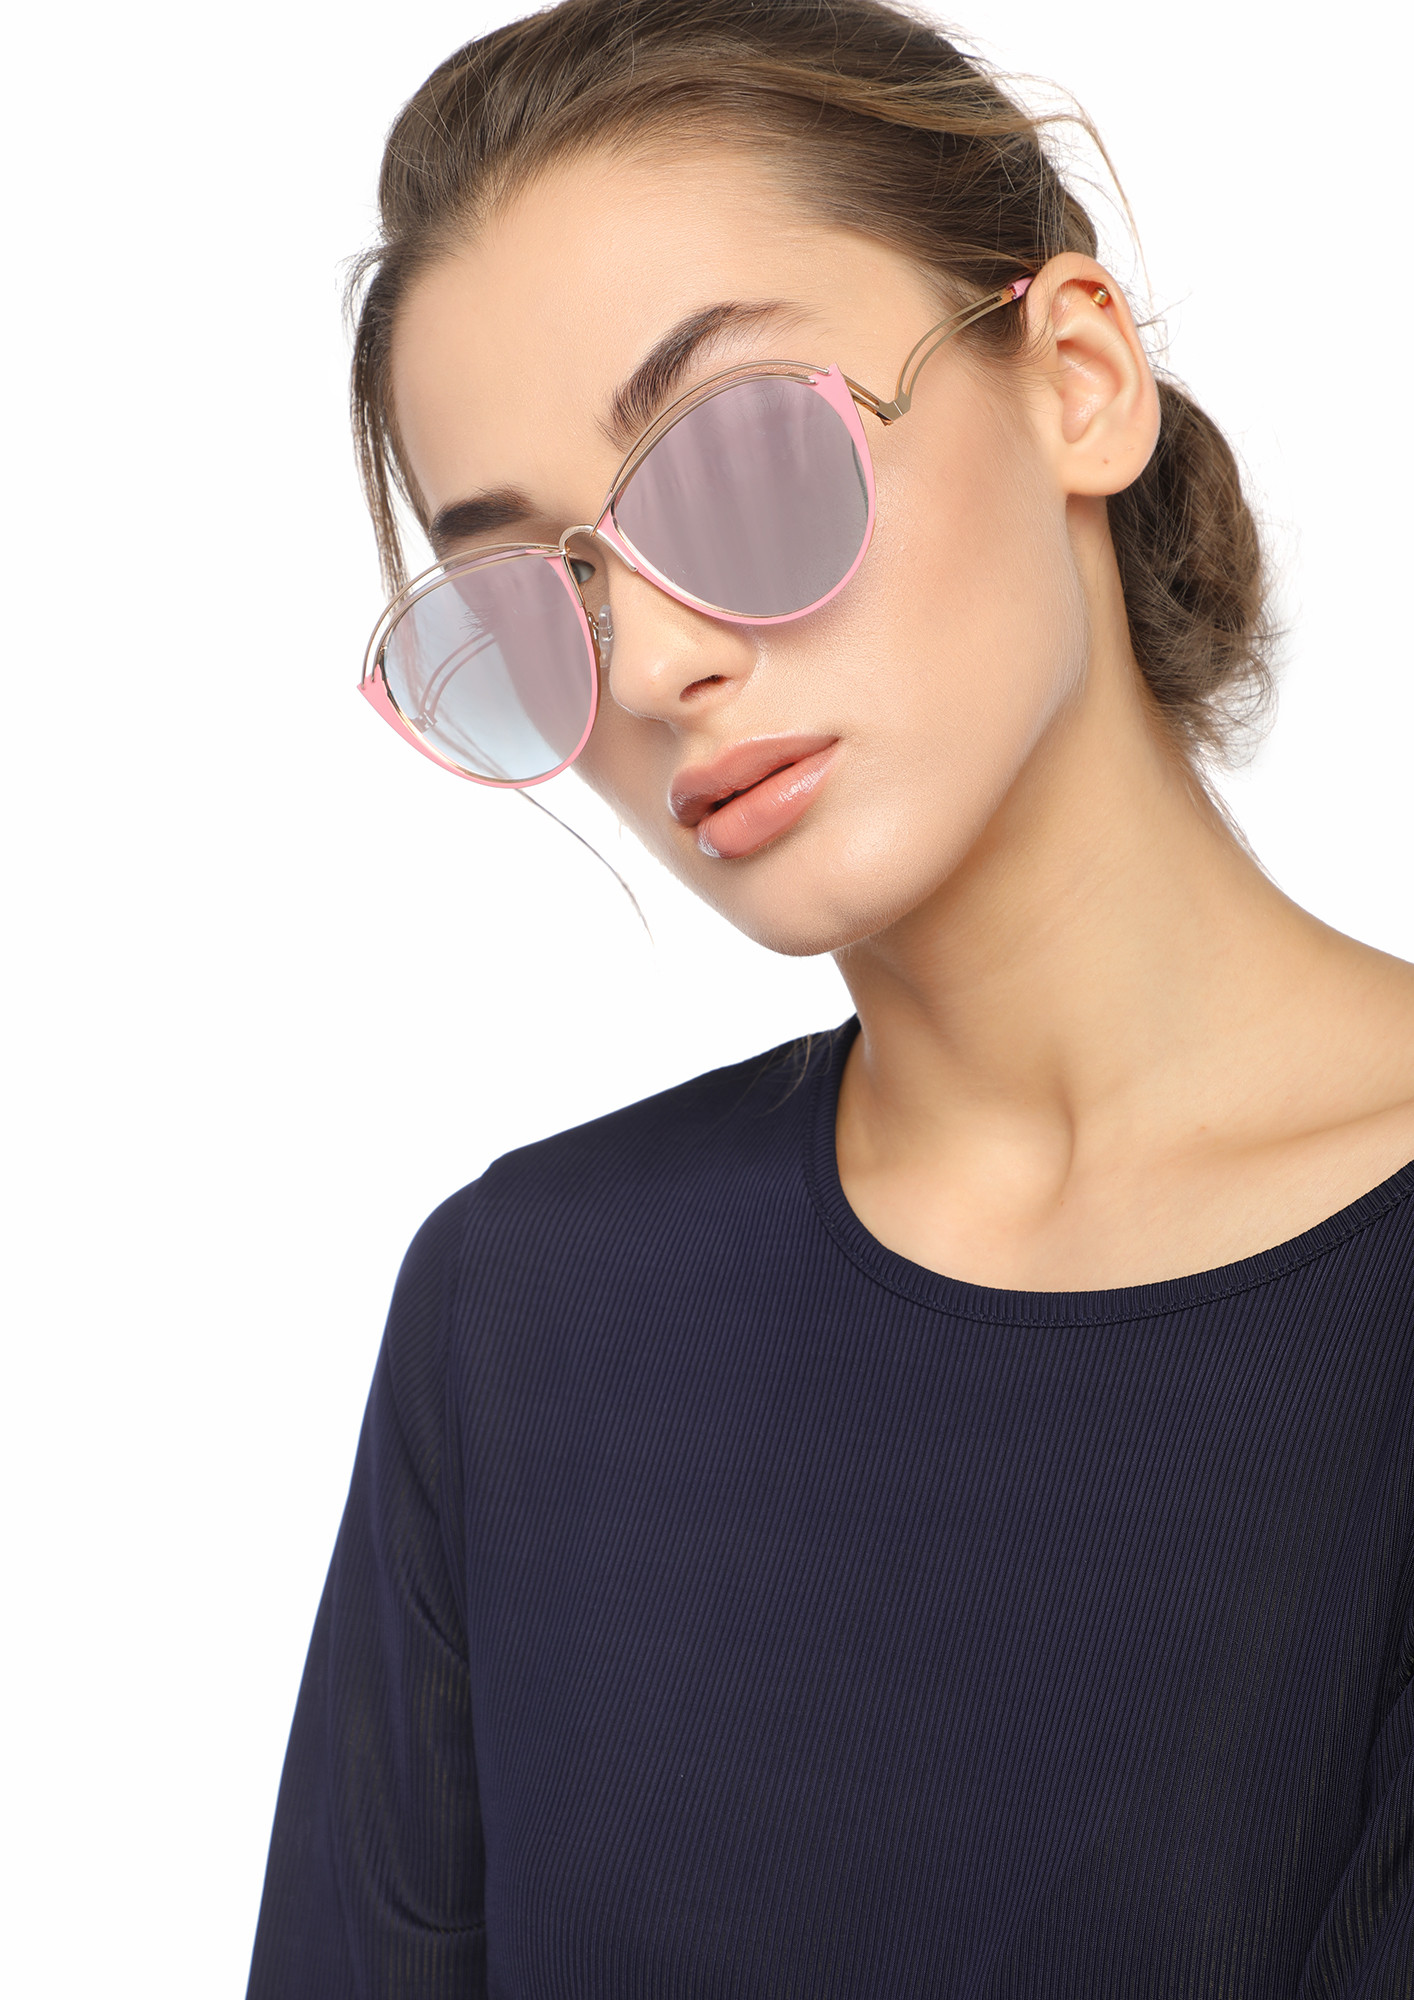 LOVE FOR CURVES PINK RETRO SUNGLASSES